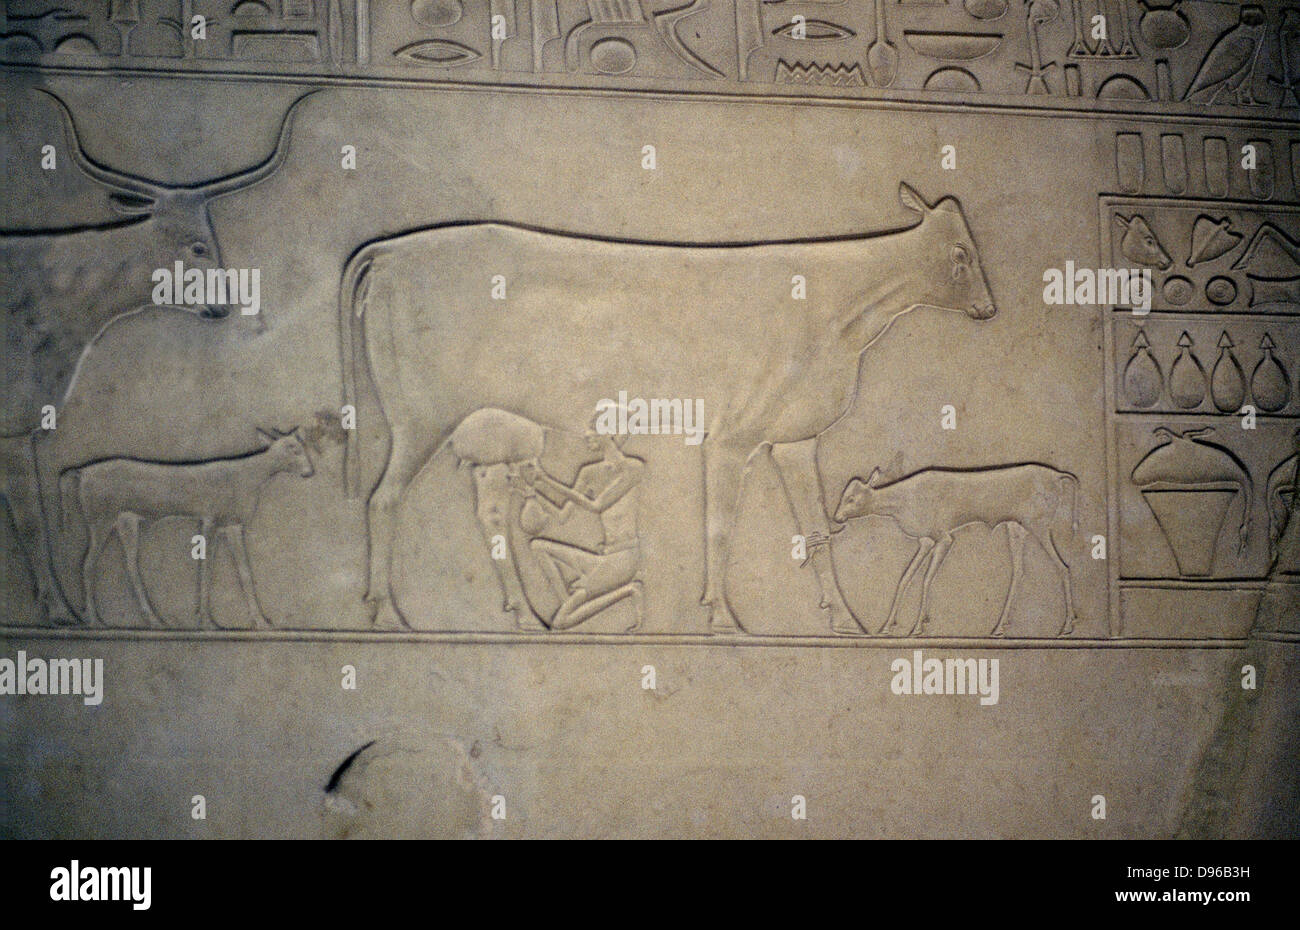 Cow being milked. Her calf is tethered to her leg. Calf behind her belongs to another cow. Detail from Middle Kingdom (c2040-1786 BC) sarcophagus Stock Photo